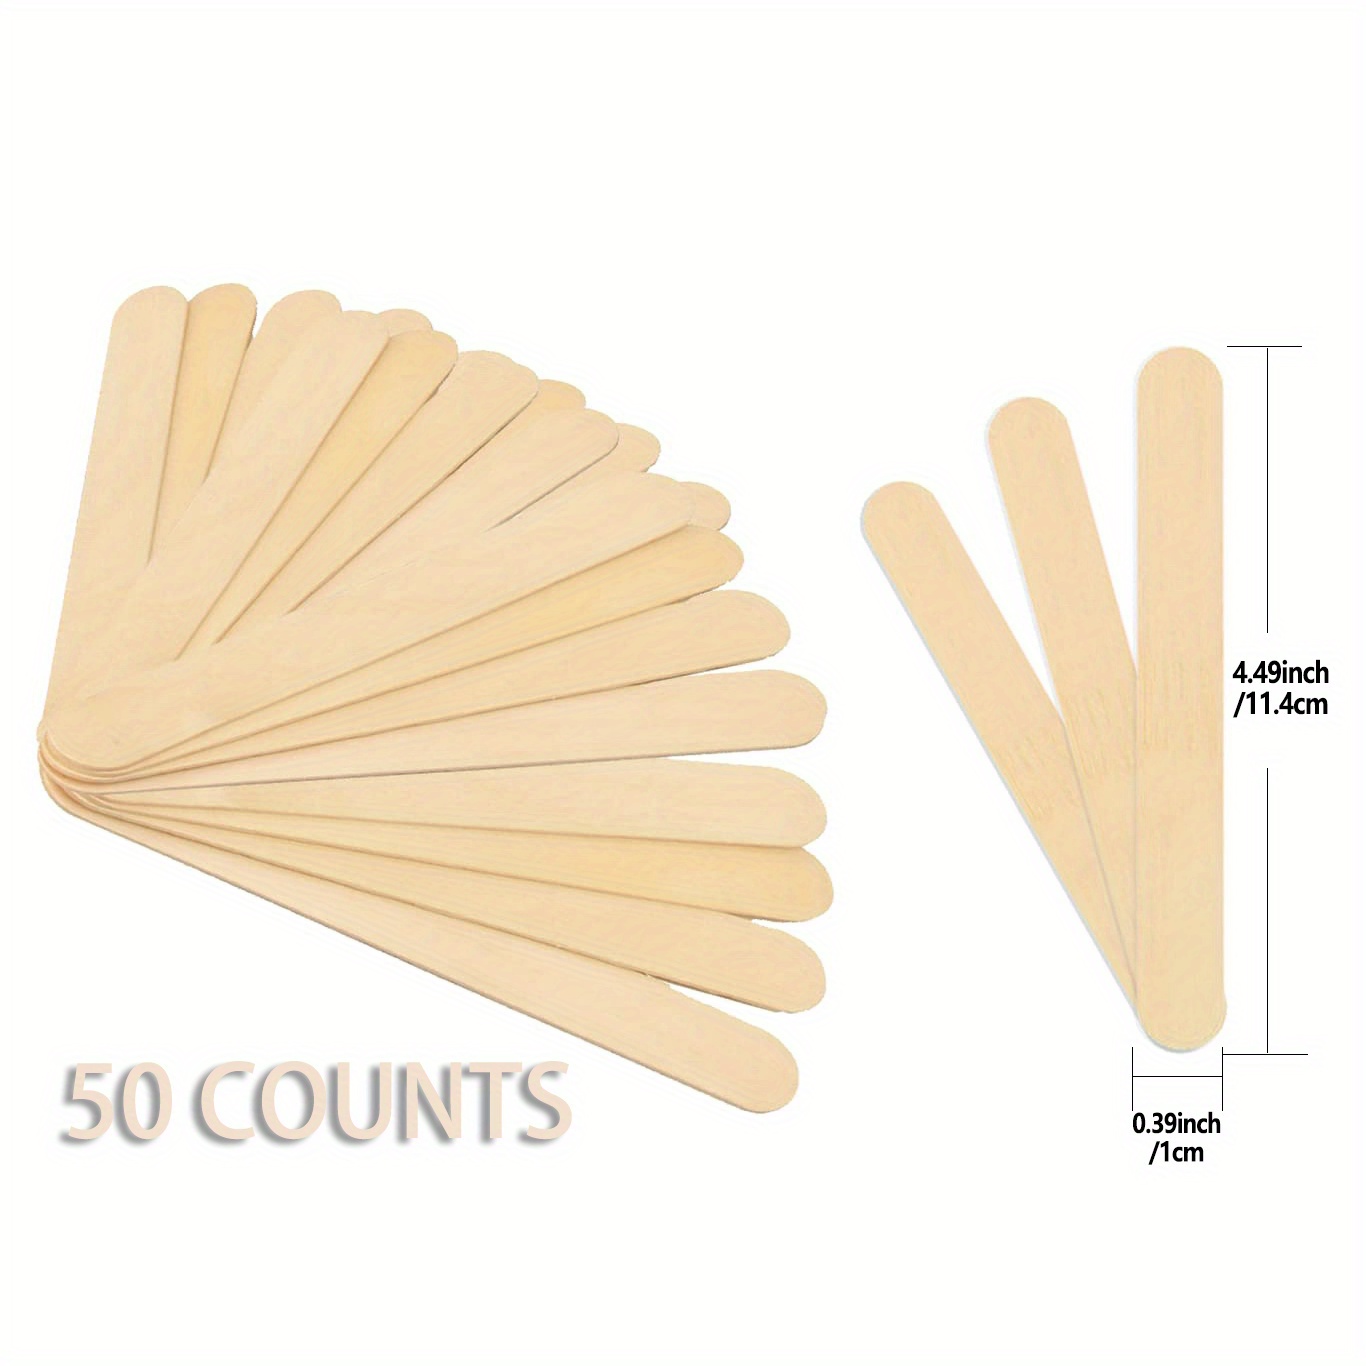 Clean + Easy Wood Applicators - Small Smarter + Precise Way To Wax for  Smooth Skin